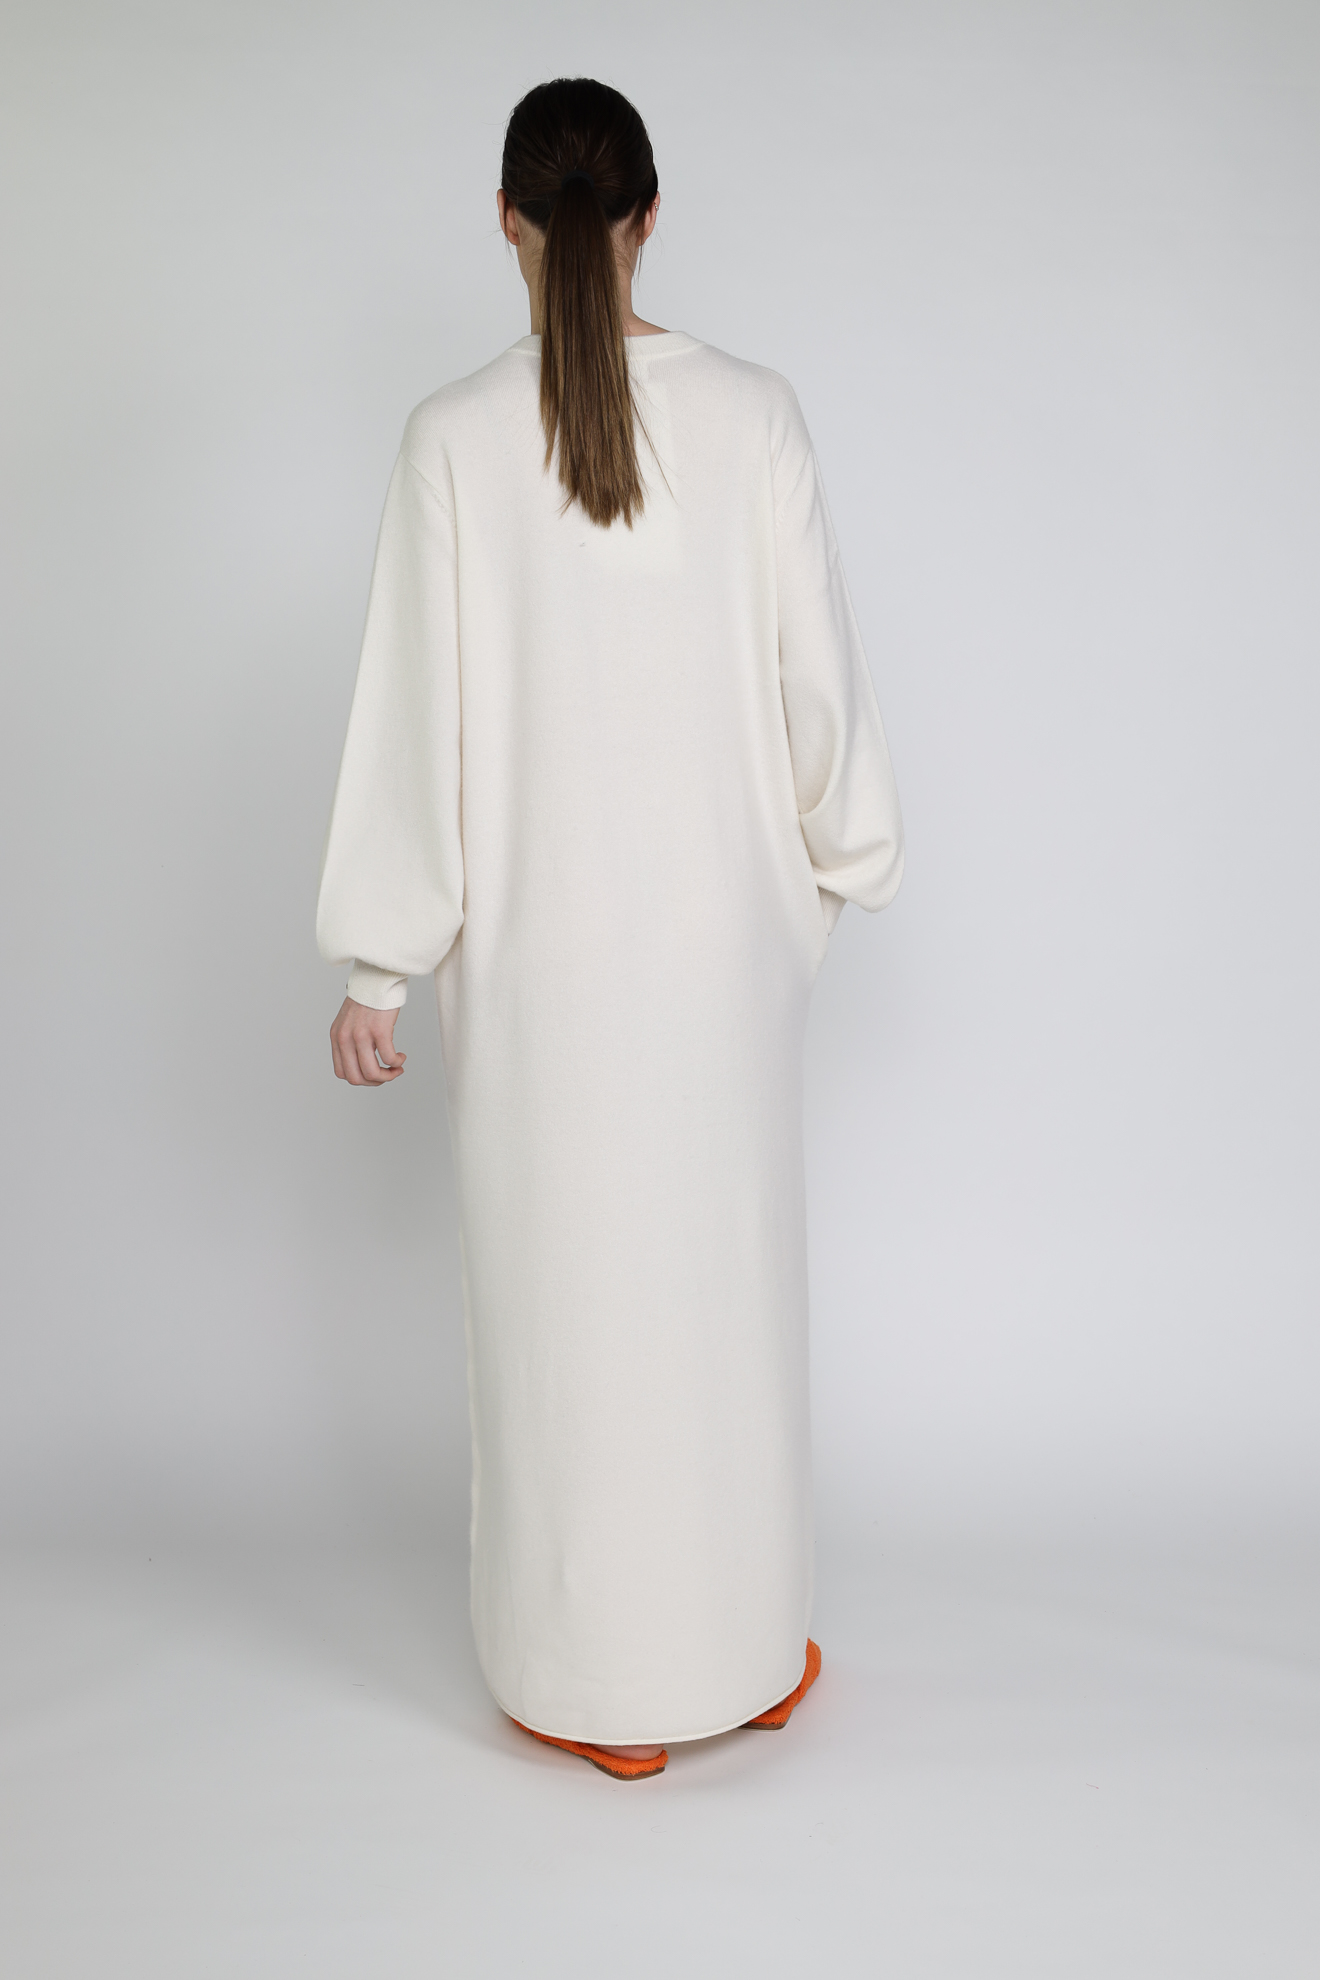 Extreme Cashmere n° 281 Santa - Knitted dress with button placket in cashmere grey One Size